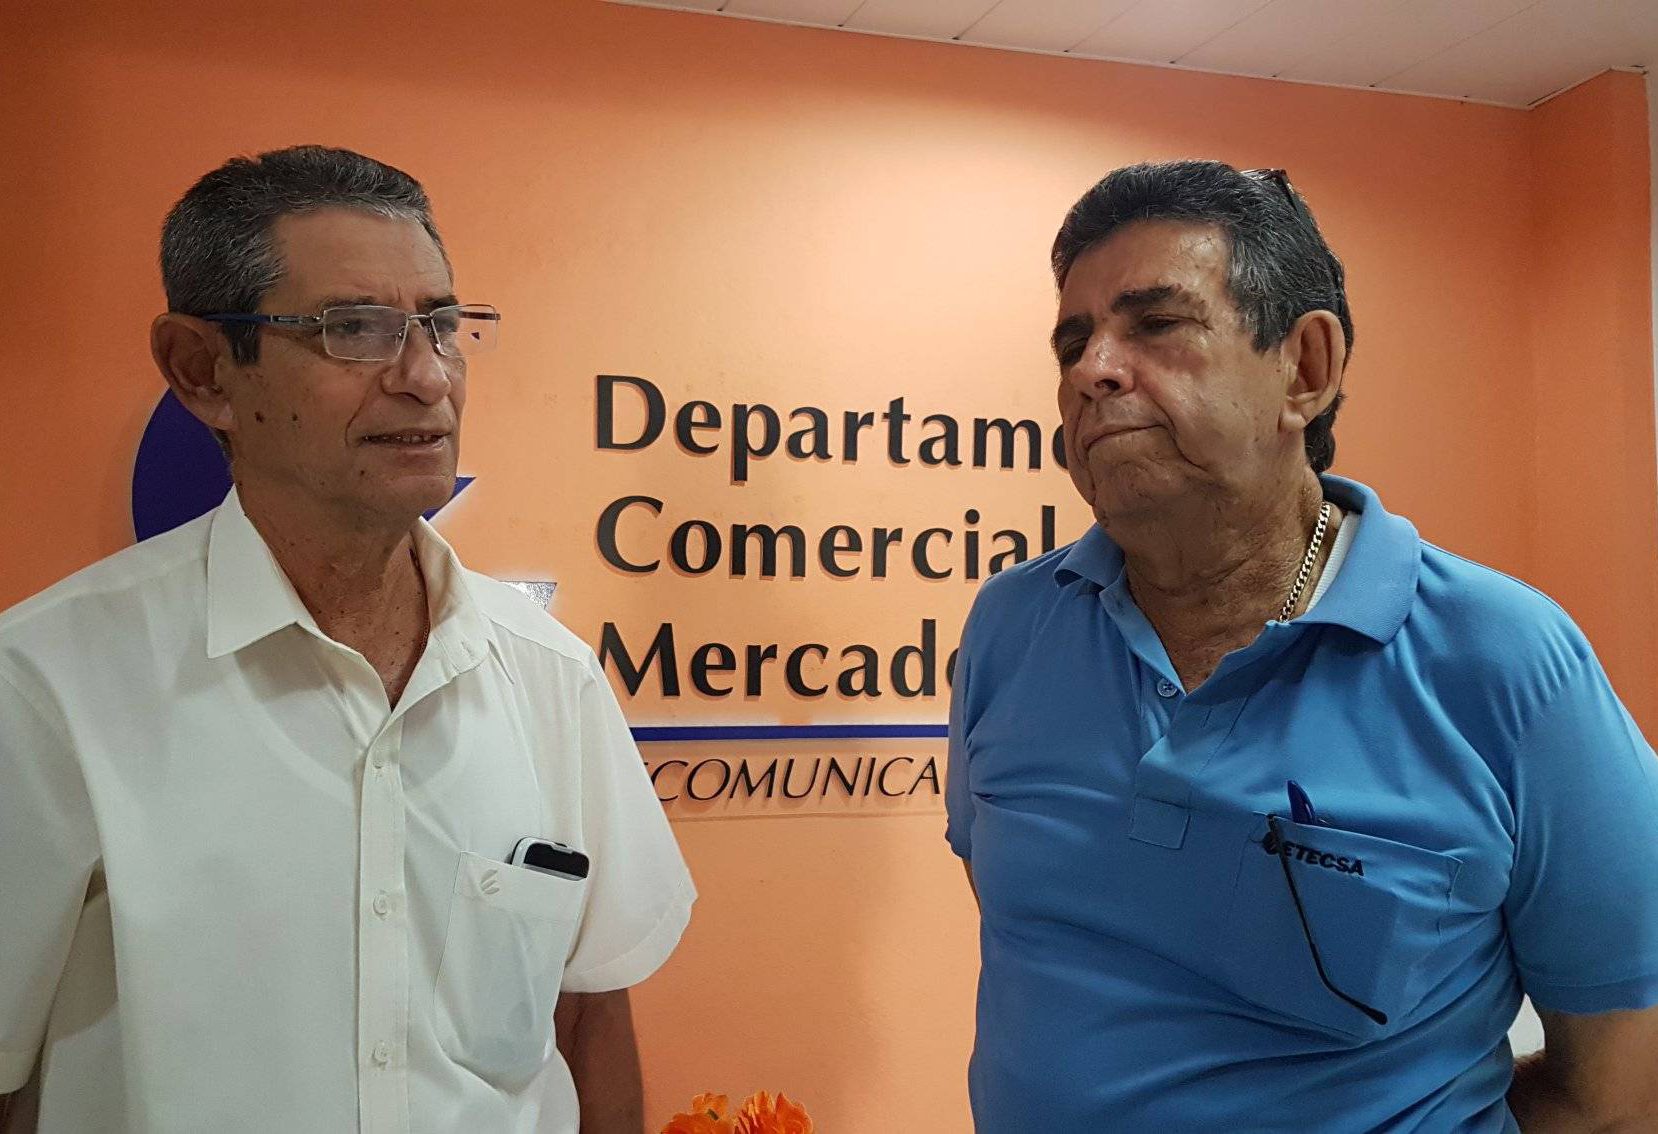 Andrés Rodríguez Almaguer and Emilio Sosa Oro, workers with 50 years of service in the Communications sector